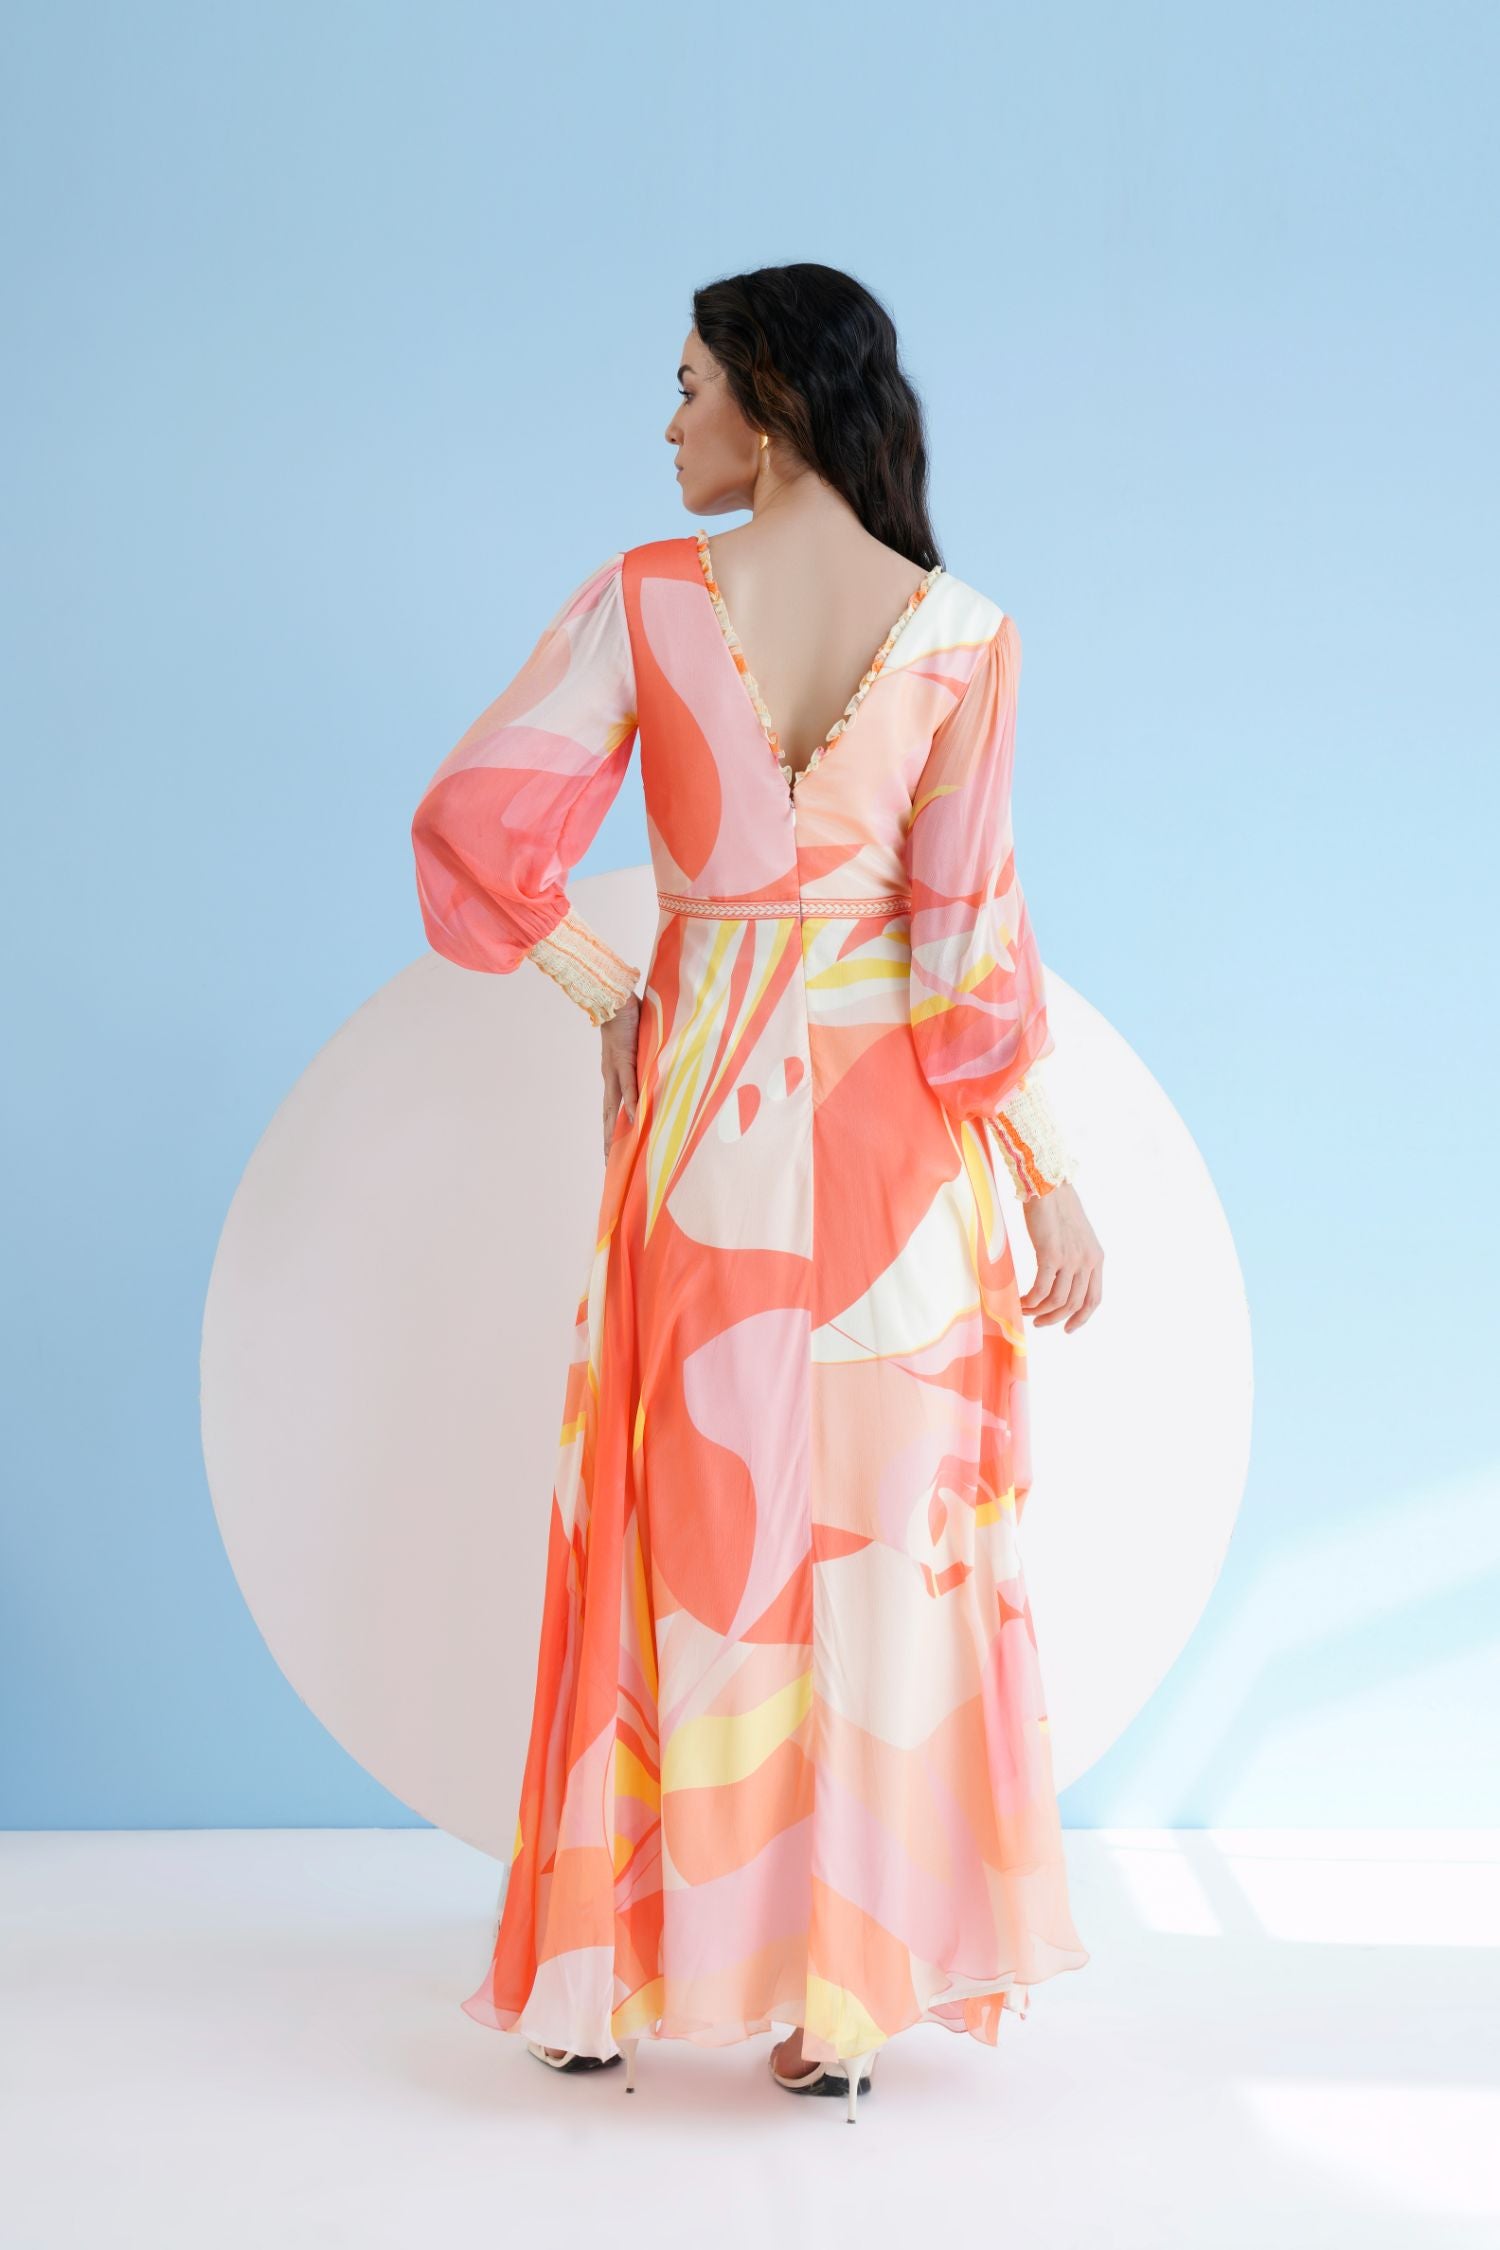 Peach Golden Ratio Printed Long Dress In Chiffon With Plunging
Neckline And Puff Sleeves